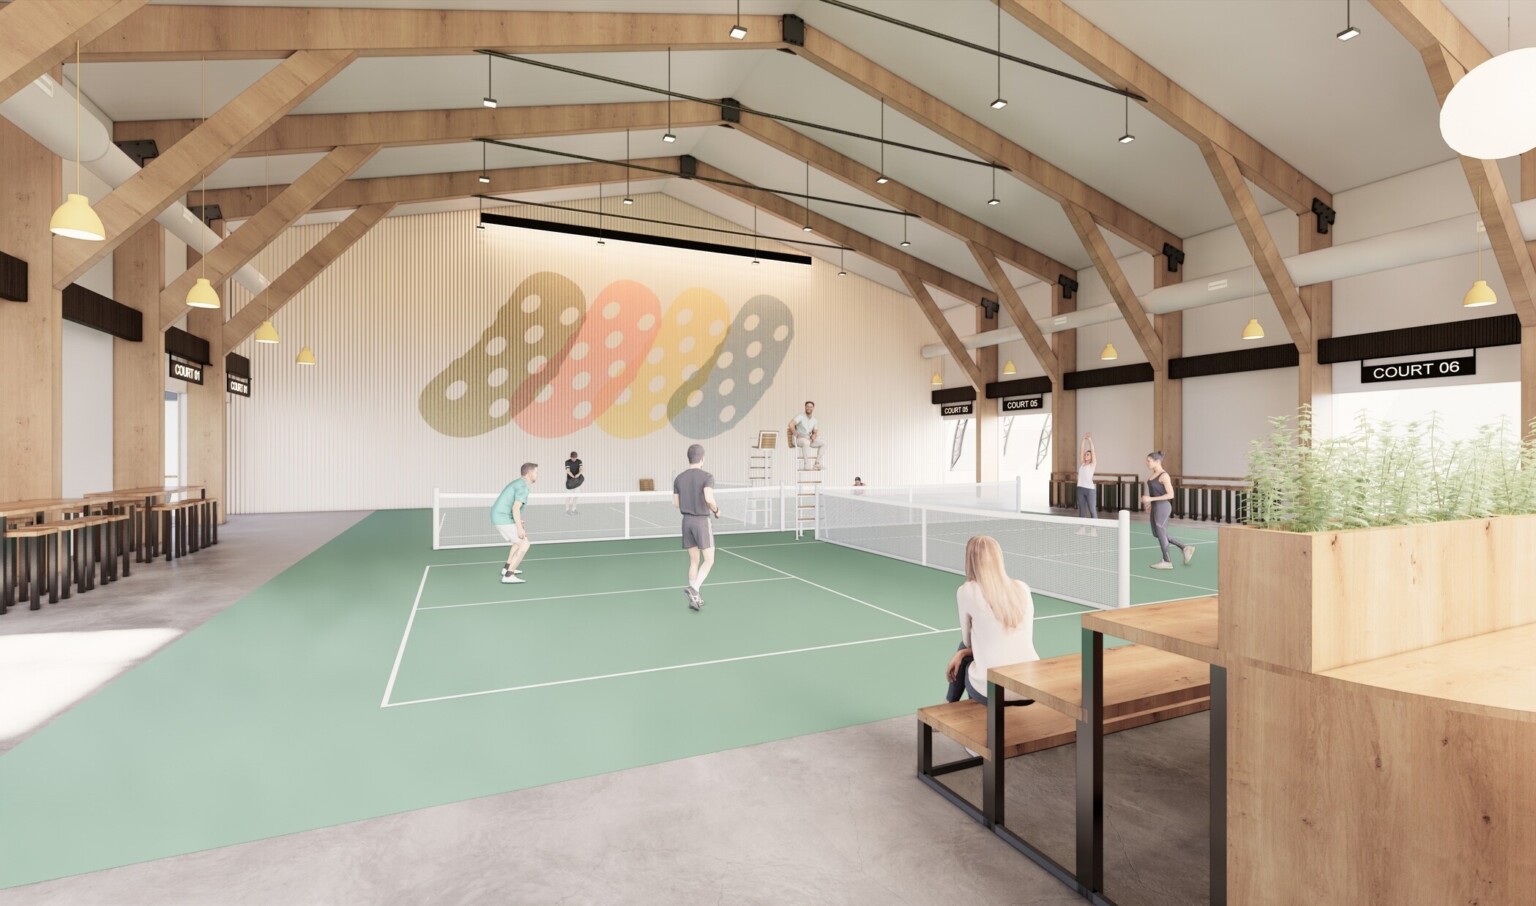 Indoor Pickle Ball court with seating area, open beams, and custom lighting